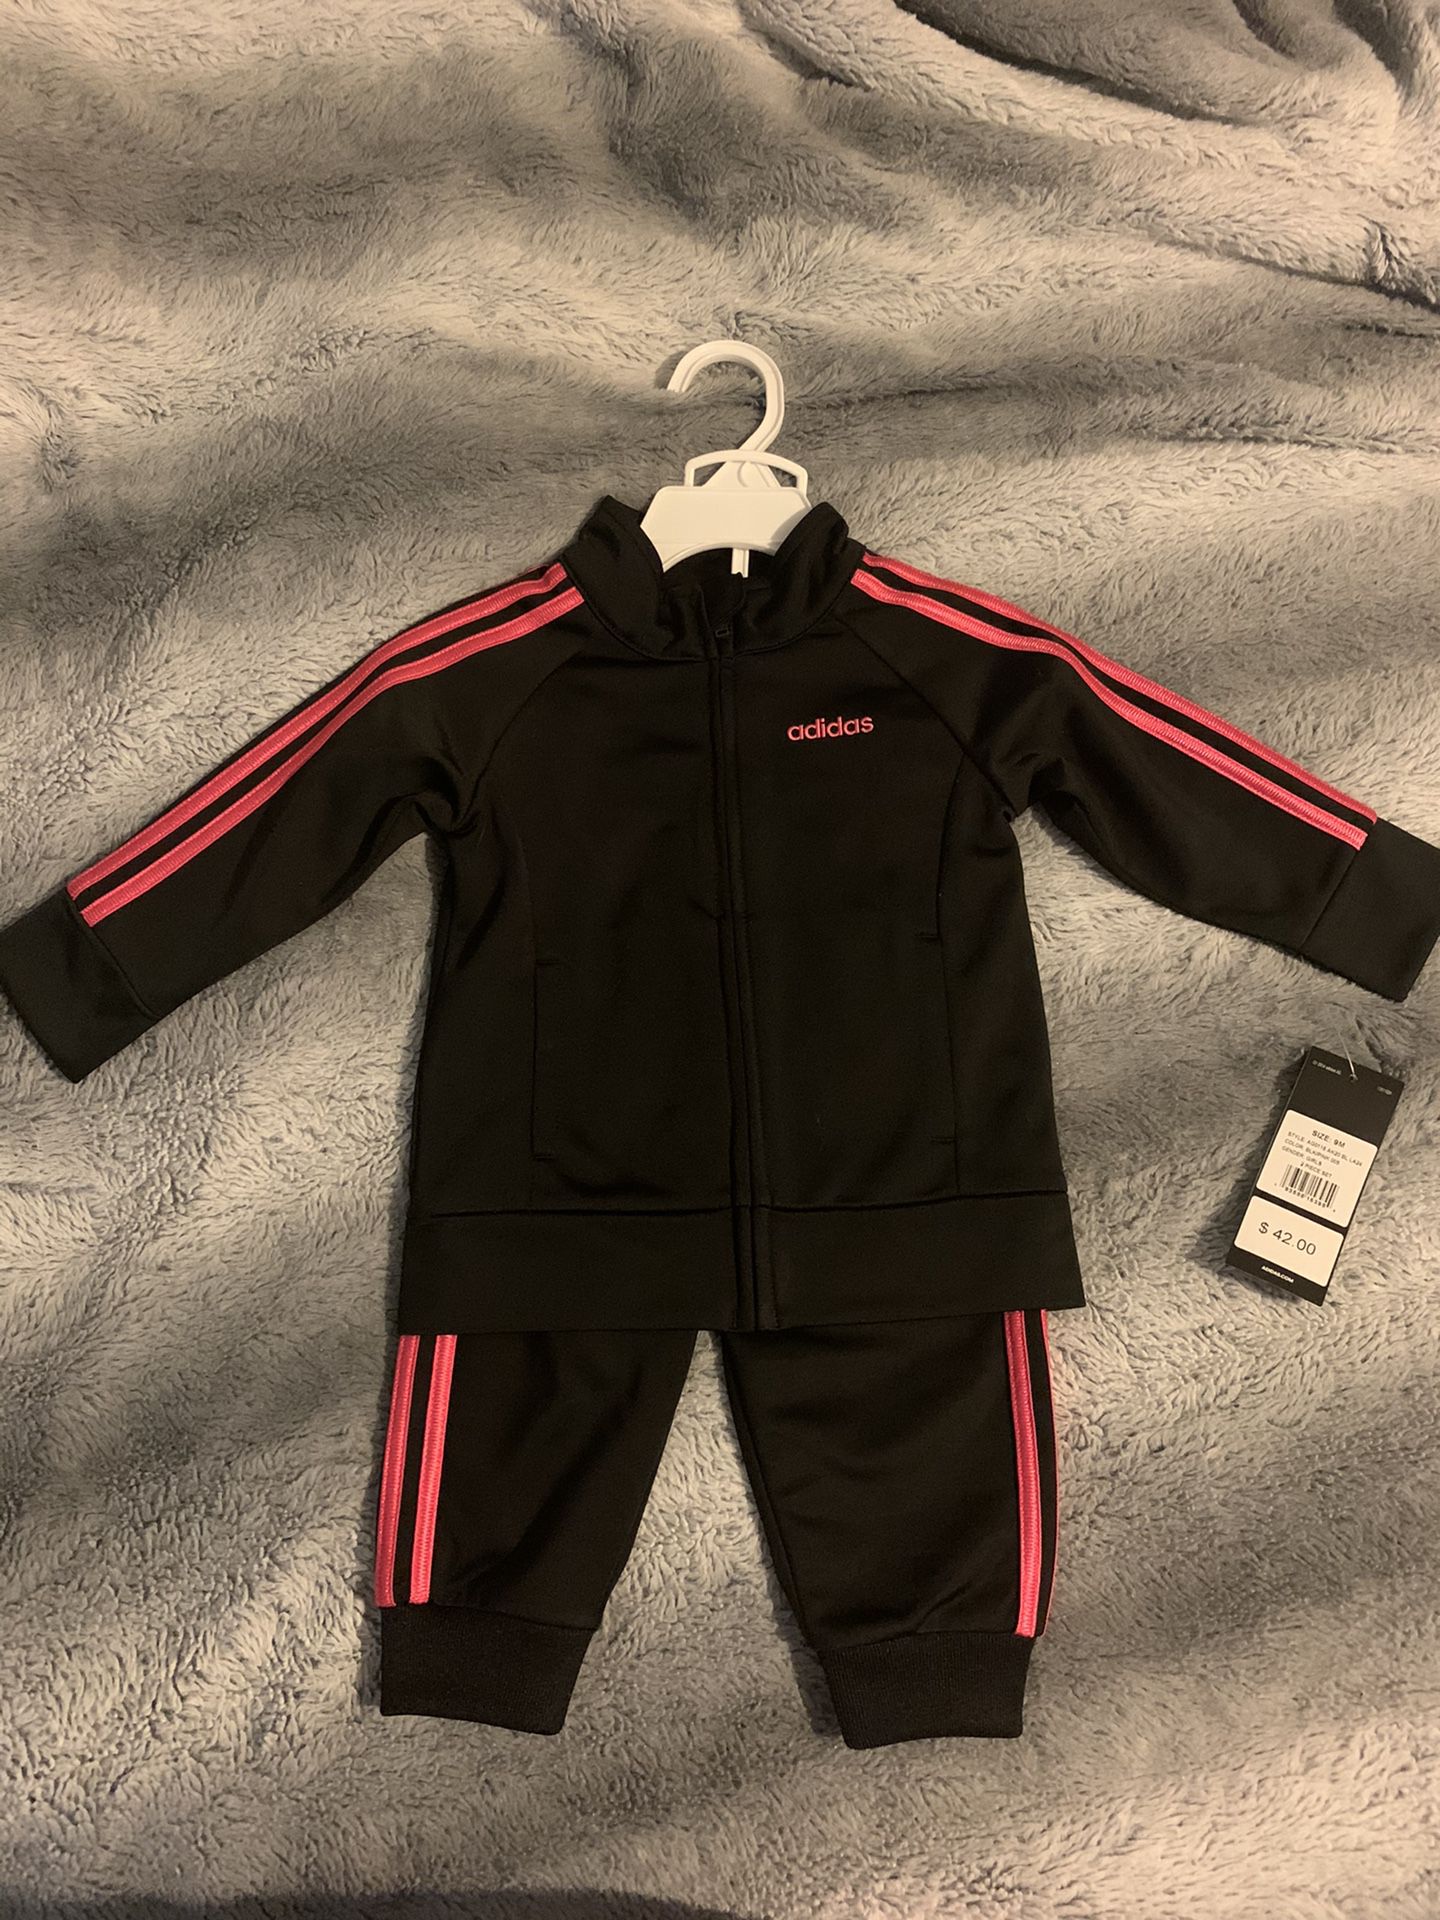 Adidas Tracksuit Size 9 Month